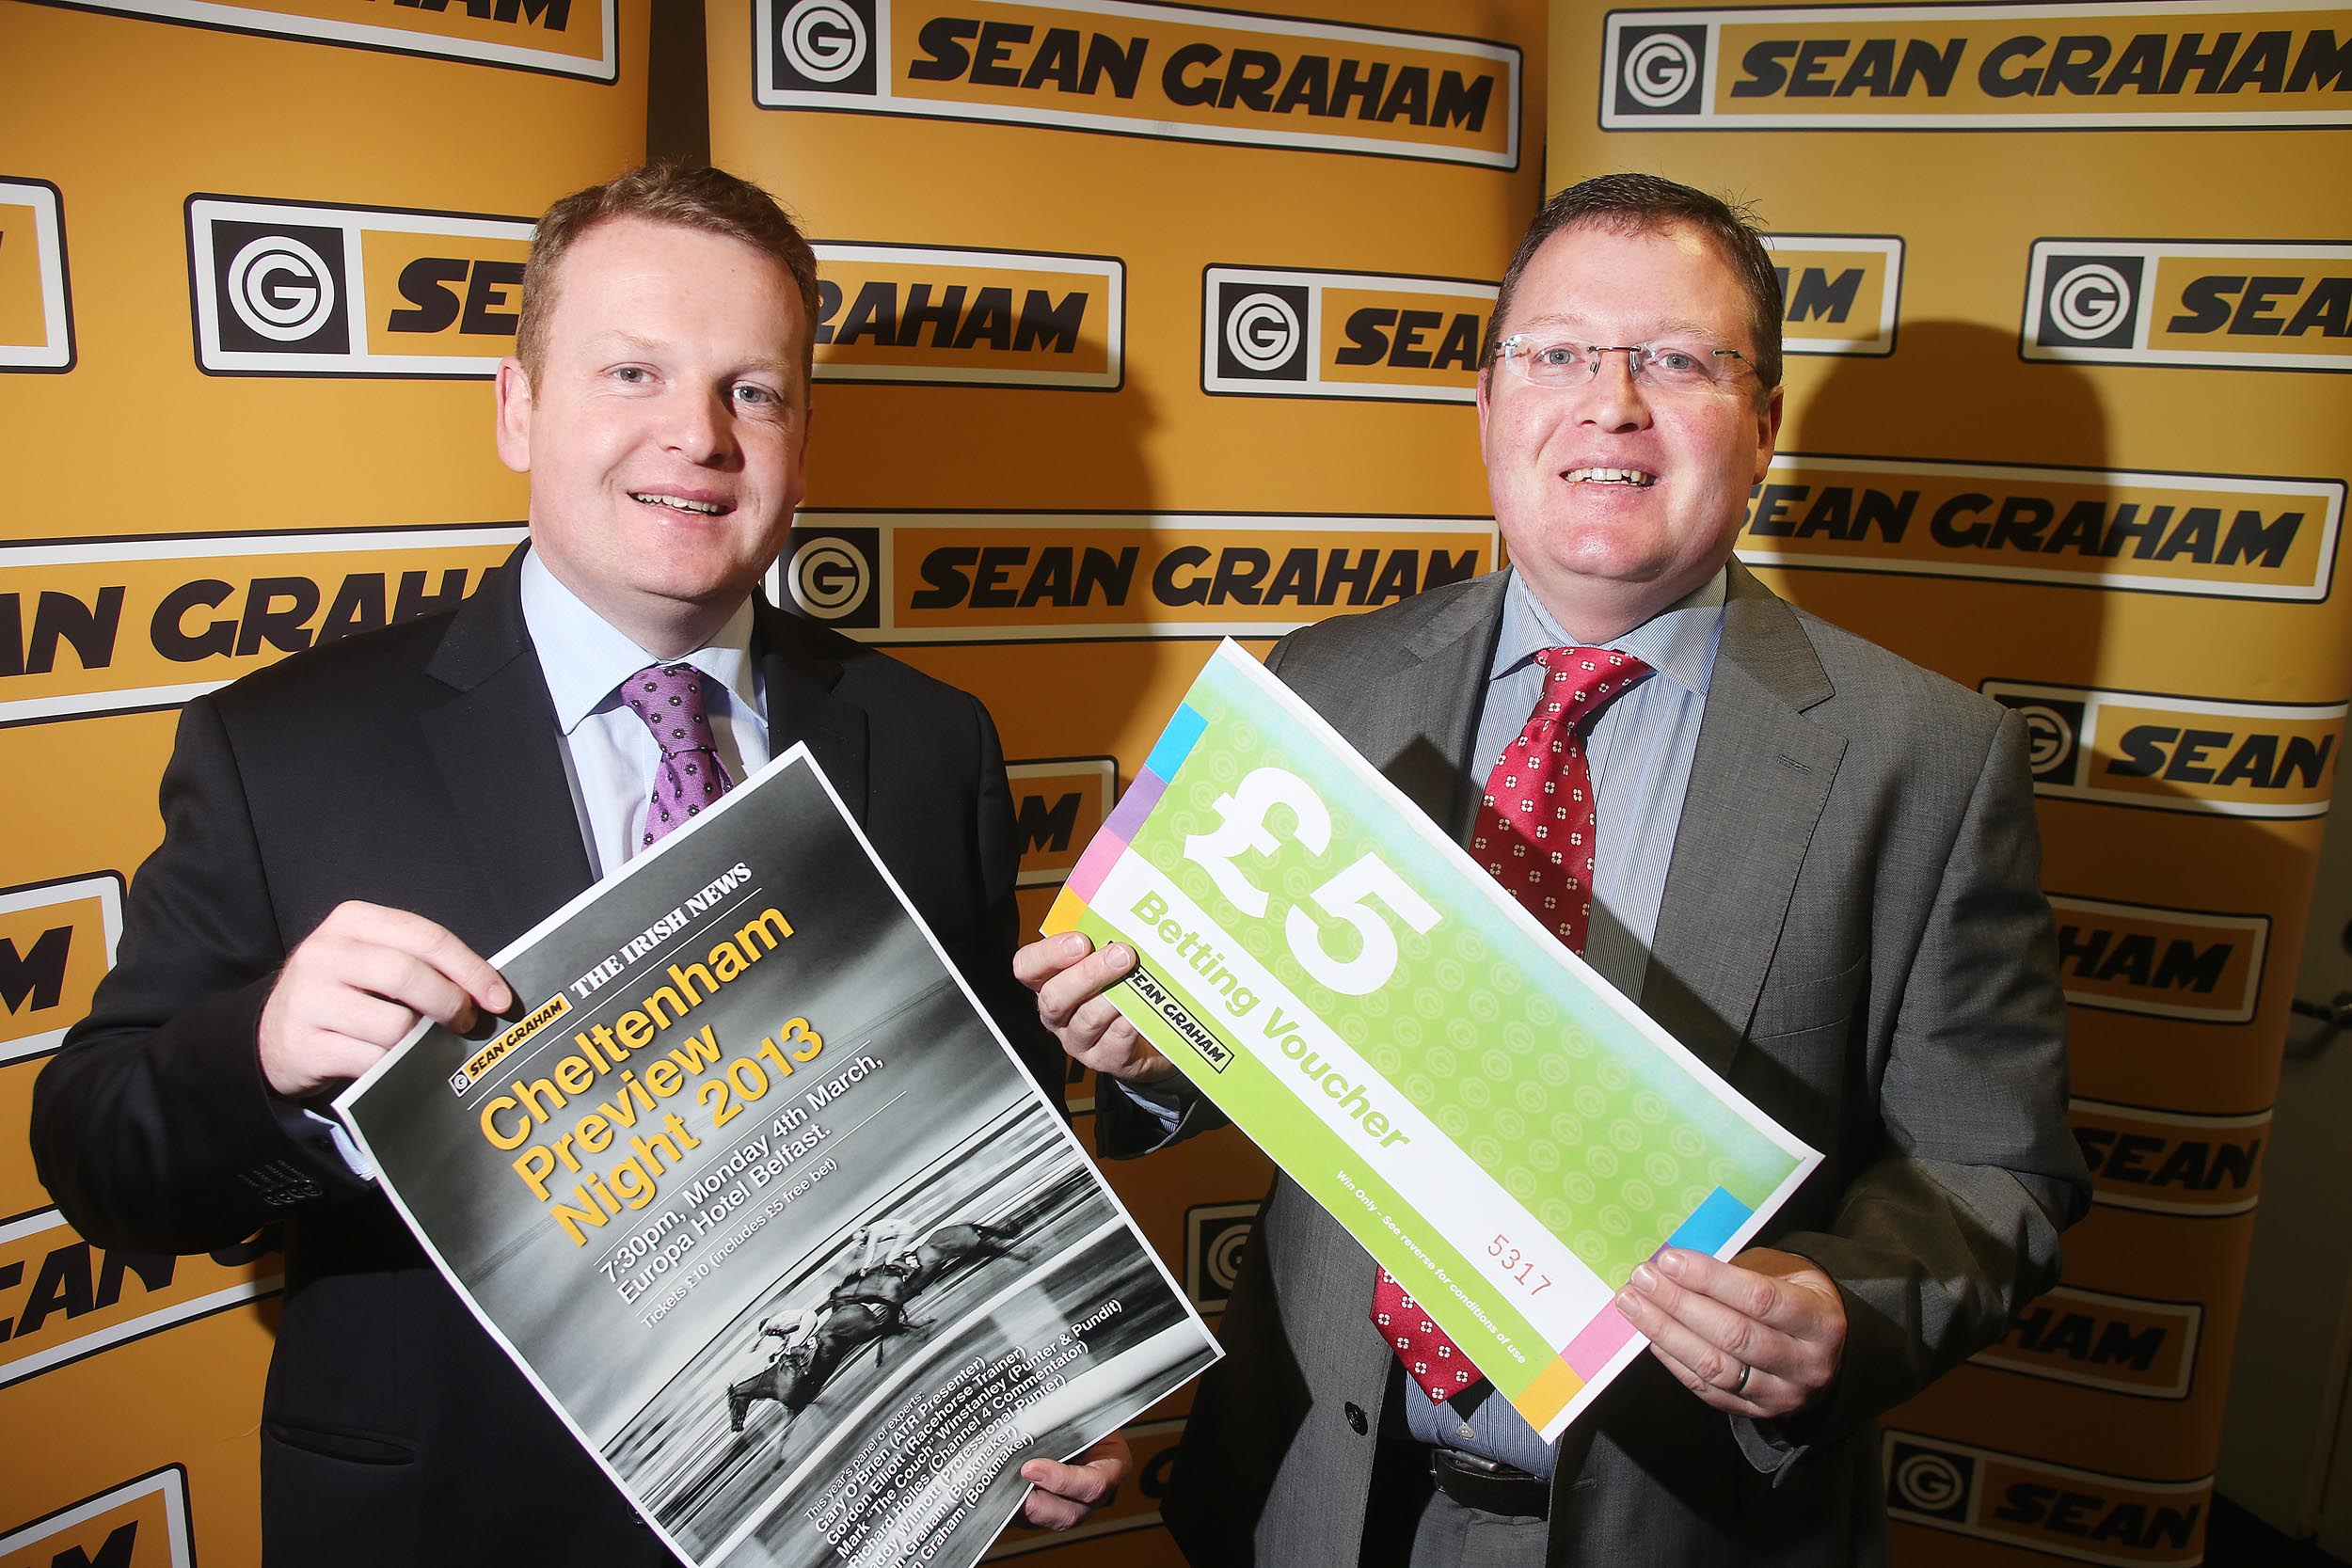 FESTIVAL FEVER: Ronan and Brian Graham get together to launch the now famous Sean Graham Cheltenham Preview Night. The date: Monday, March 4. The venue: The Europa. It’s not be missed if you’re serious about racing – tickets available in Sean Graham shops 